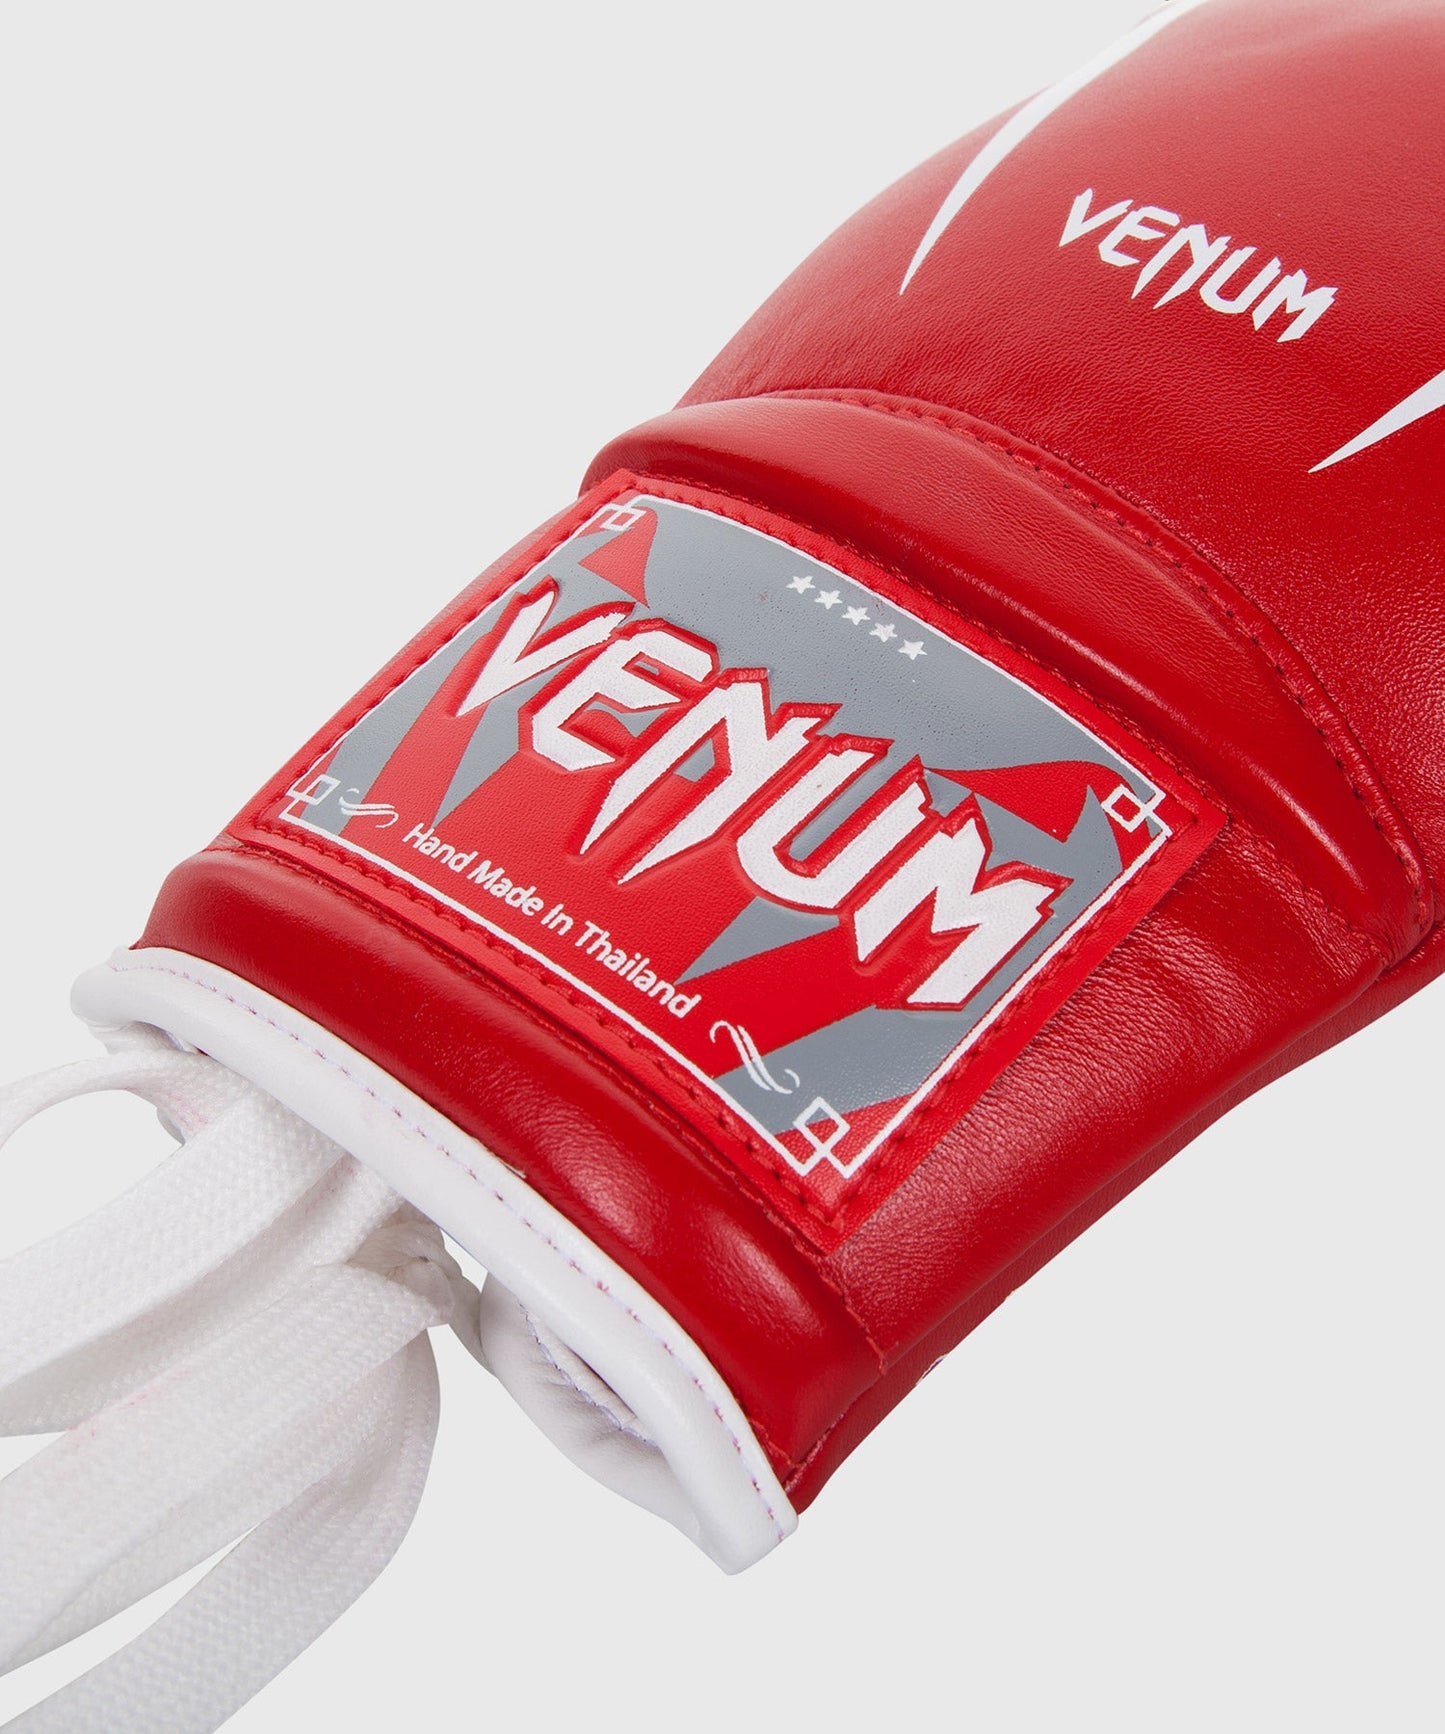 Venum Giant 3.0 Boxing Gloves - Nappa Leather - With Laces - Red